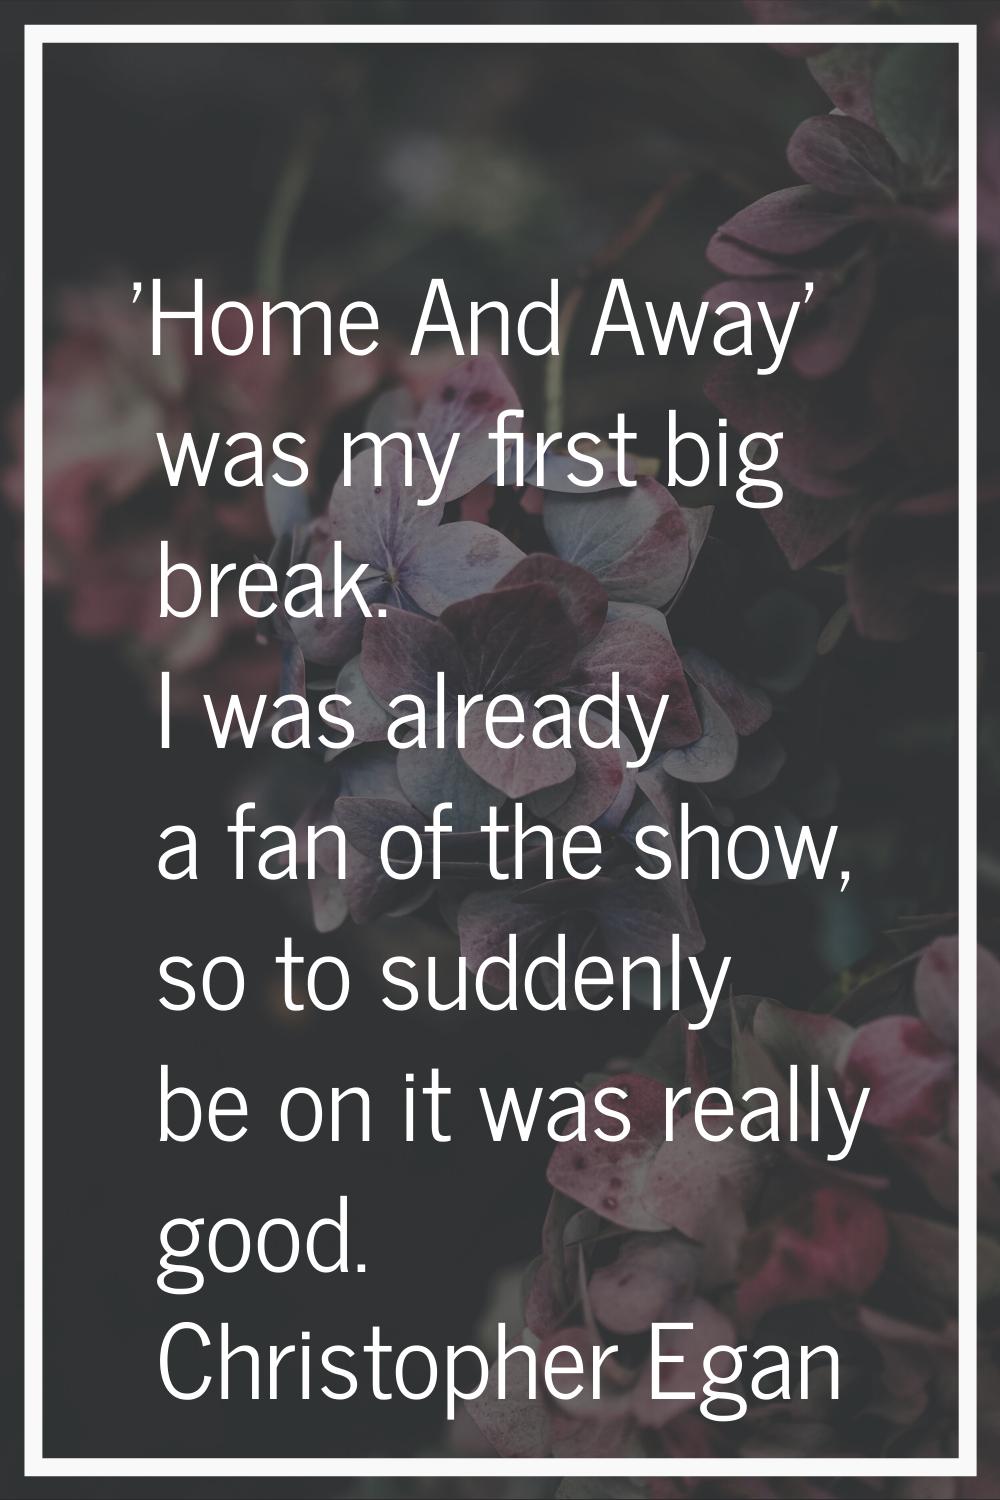 'Home And Away' was my first big break. I was already a fan of the show, so to suddenly be on it wa